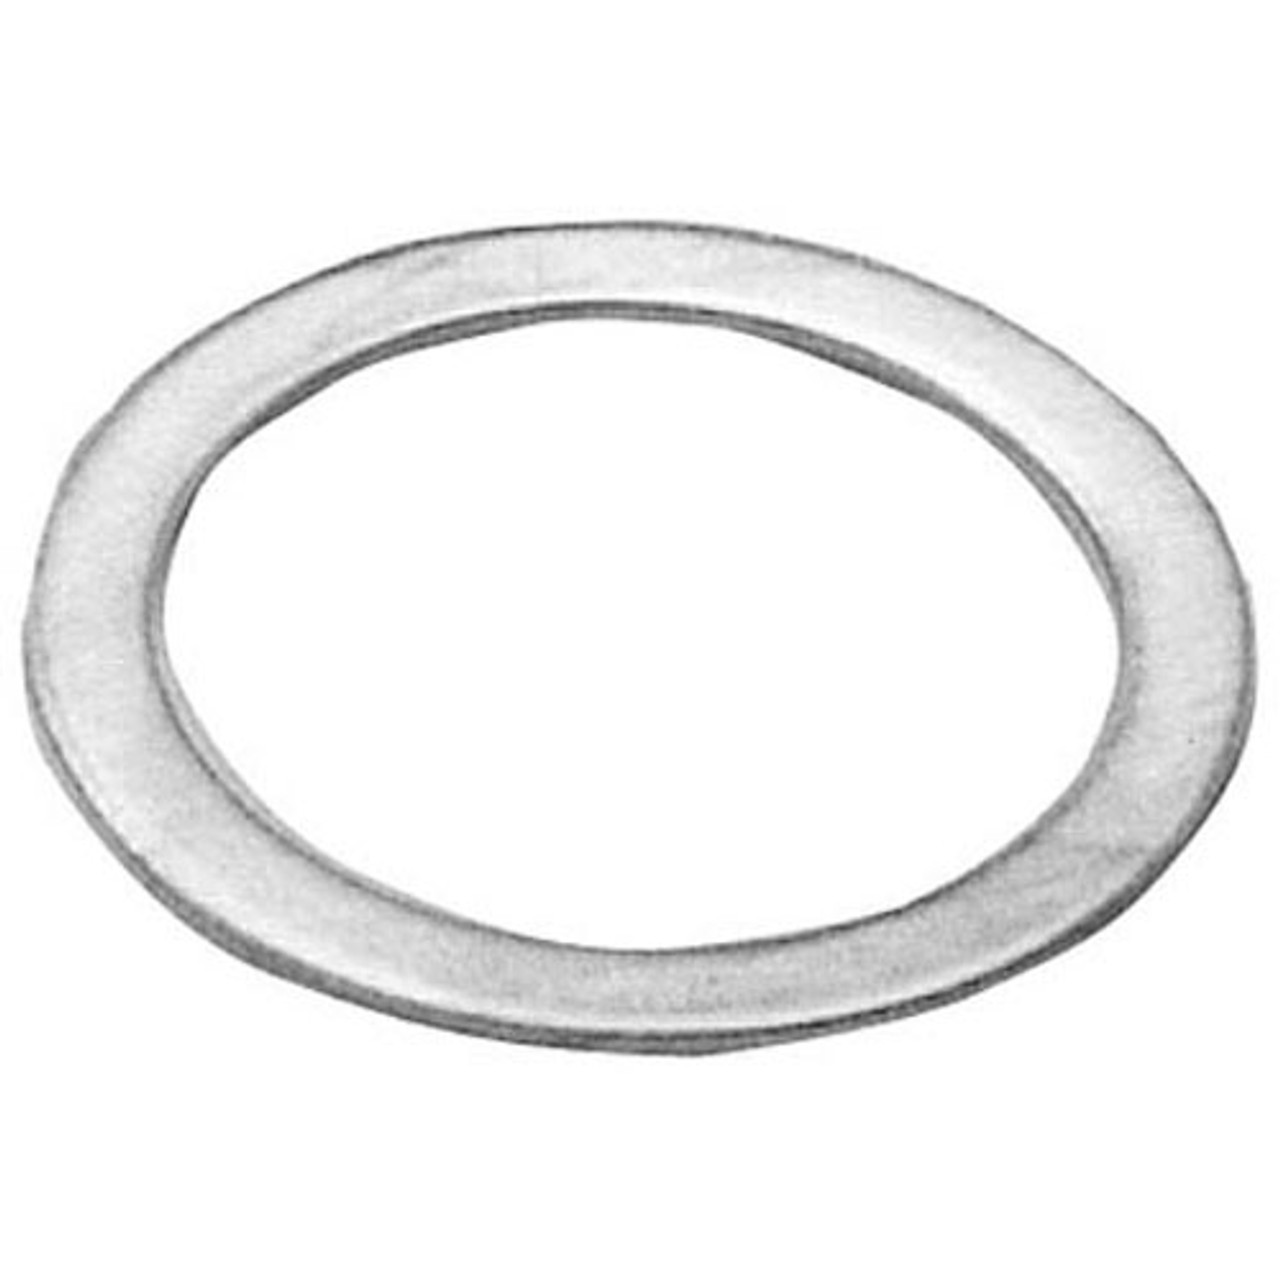 Brass Washer - Replacement Part For Blodgett 41744